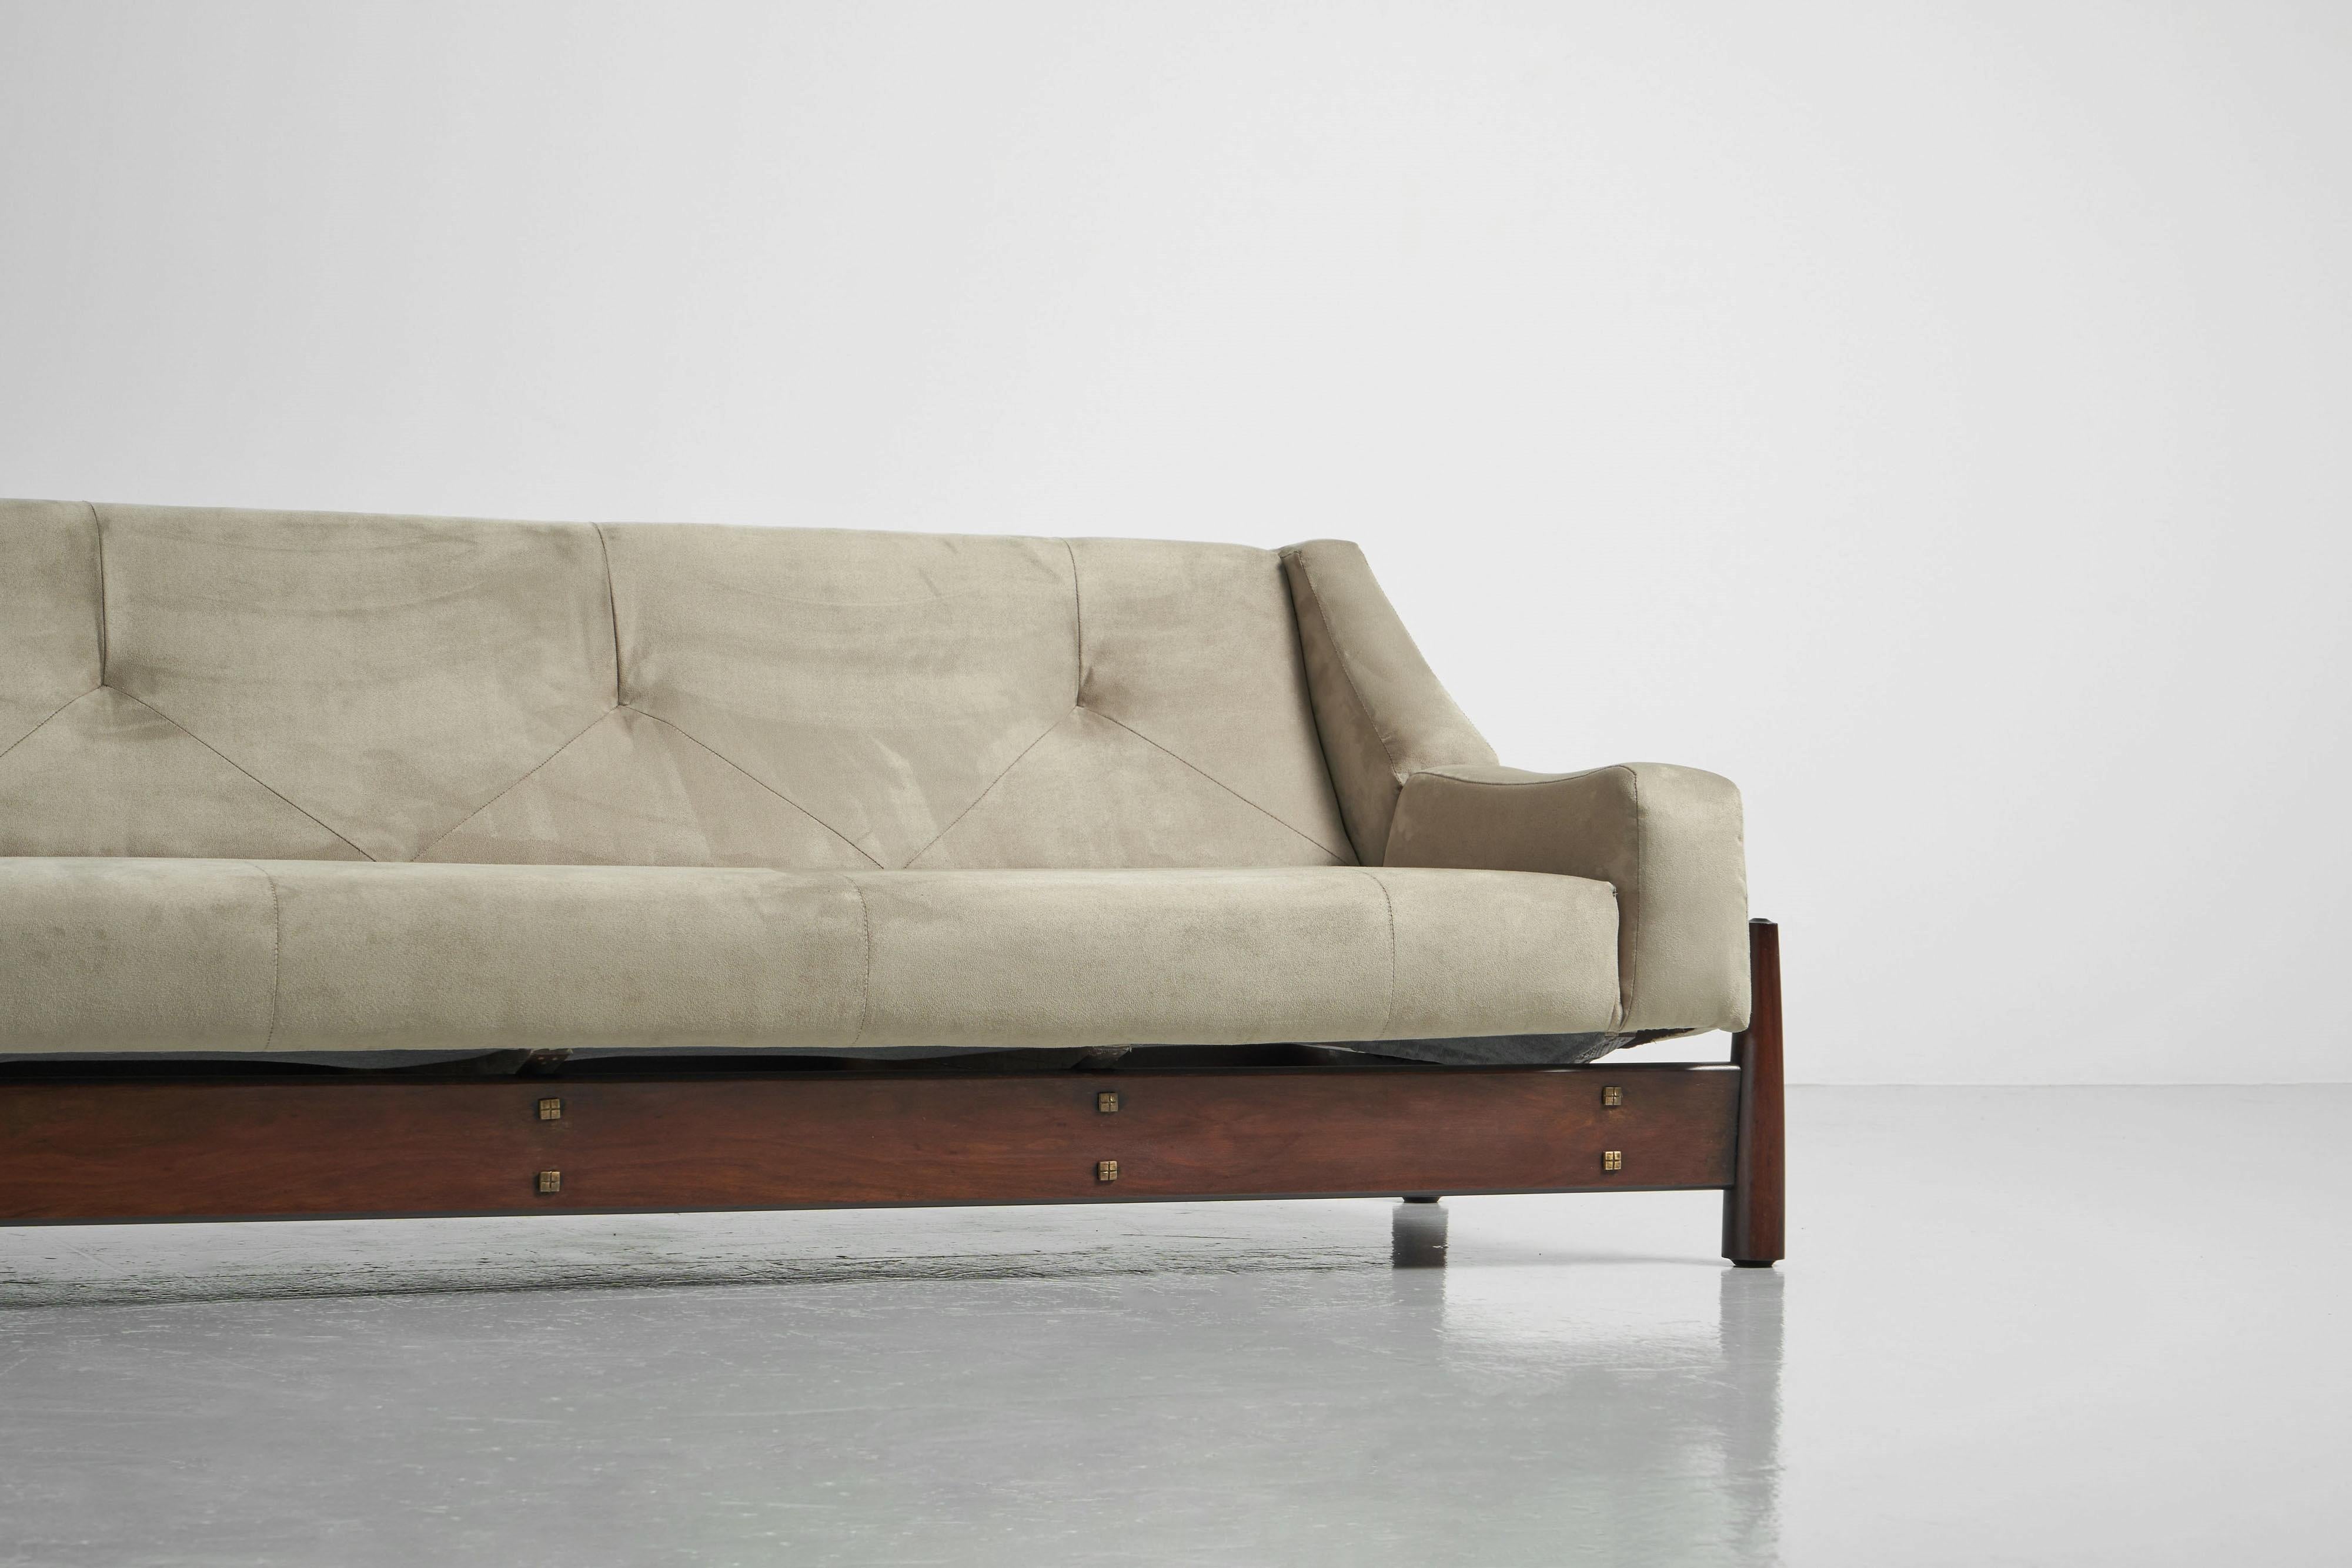 Beautiful sculptural B082 sofa manufactured by Moveis Cimo in Brazil in 1960. This sofa is bulky and yet playful, with a strong wooden frame made of Jatoba wood. The frame is like a rectangle, and at each corner, there are thin tapered legs that